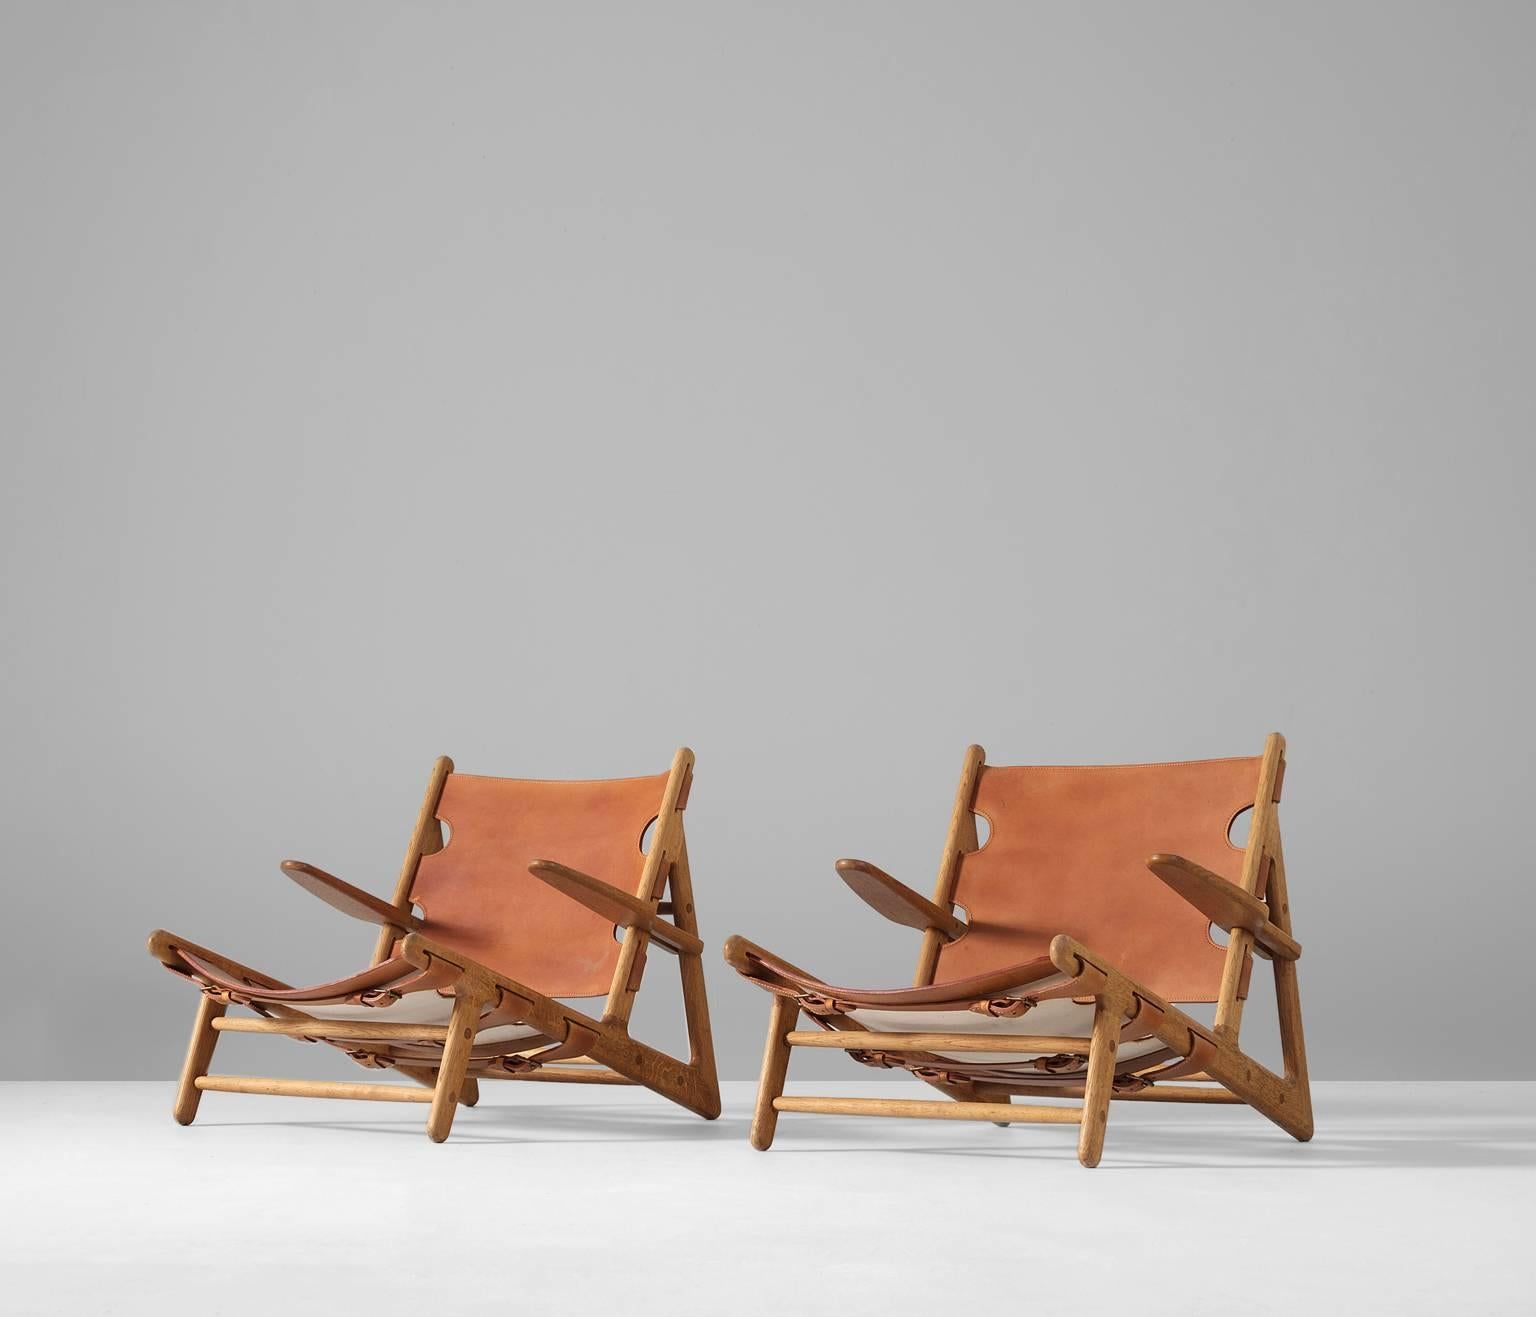 Hunting chairs, in oak and cognac saddle leather, by Børge Mogensen for Fredericia Stolefabrik, Denmark 1950.  

The hunting chair was Mogensens first work with a solid wooden frame and saddle leather seating. This iconic piece was the first in a